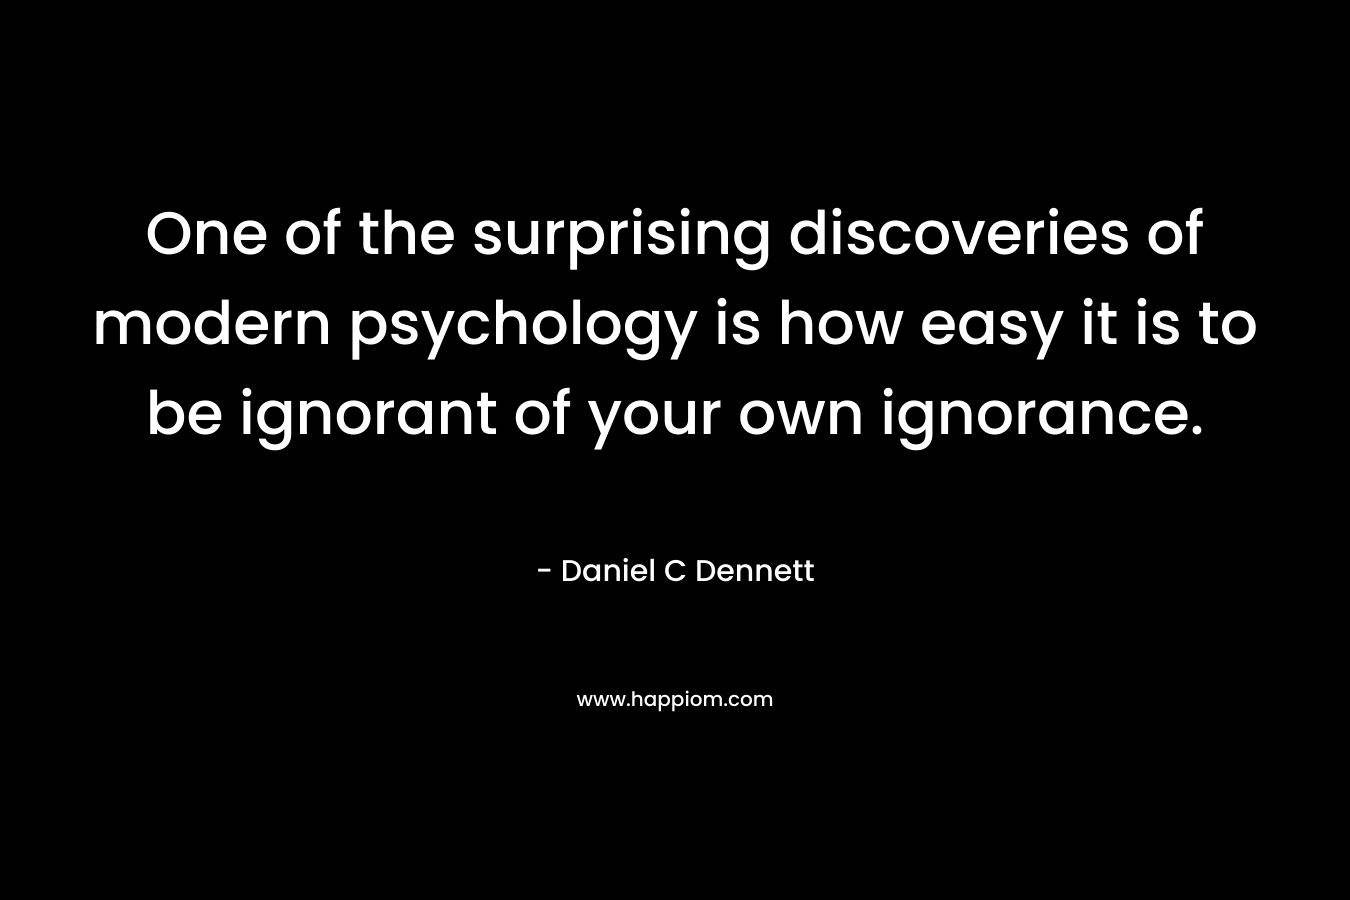 One of the surprising discoveries of modern psychology is how easy it is to be ignorant of your own ignorance.